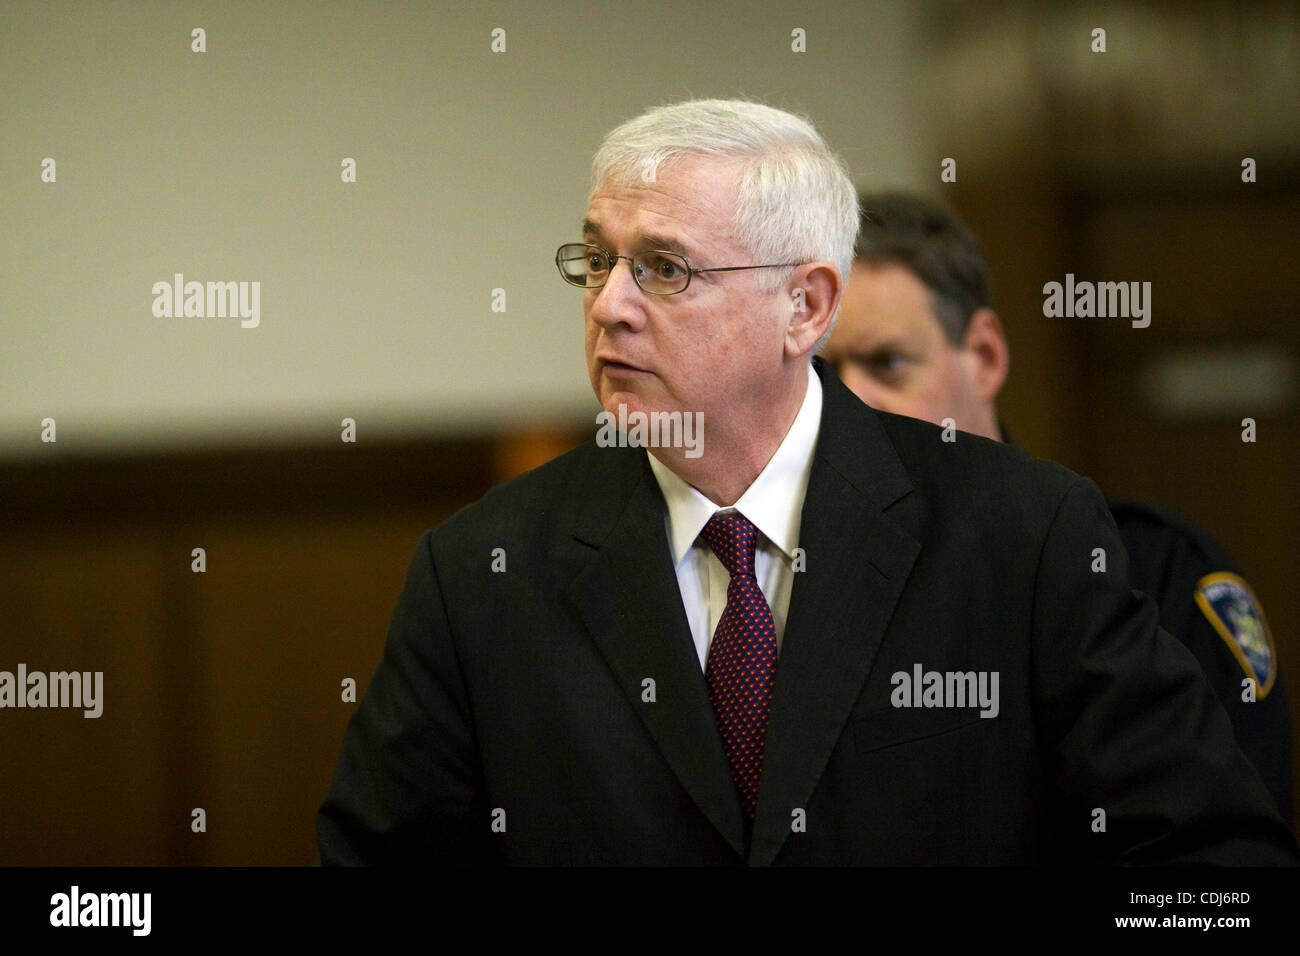 Feb. 17, 2011 - New York, New York, U.S. - New York political operative Hank Morris was sentenced today to a prison term of at least sixteen months for his participation in a kickback scandal while he served in the comptroller's office. (Credit Image: © John Marshall Mantel/ZUMAPRESS.com) Stock Photo